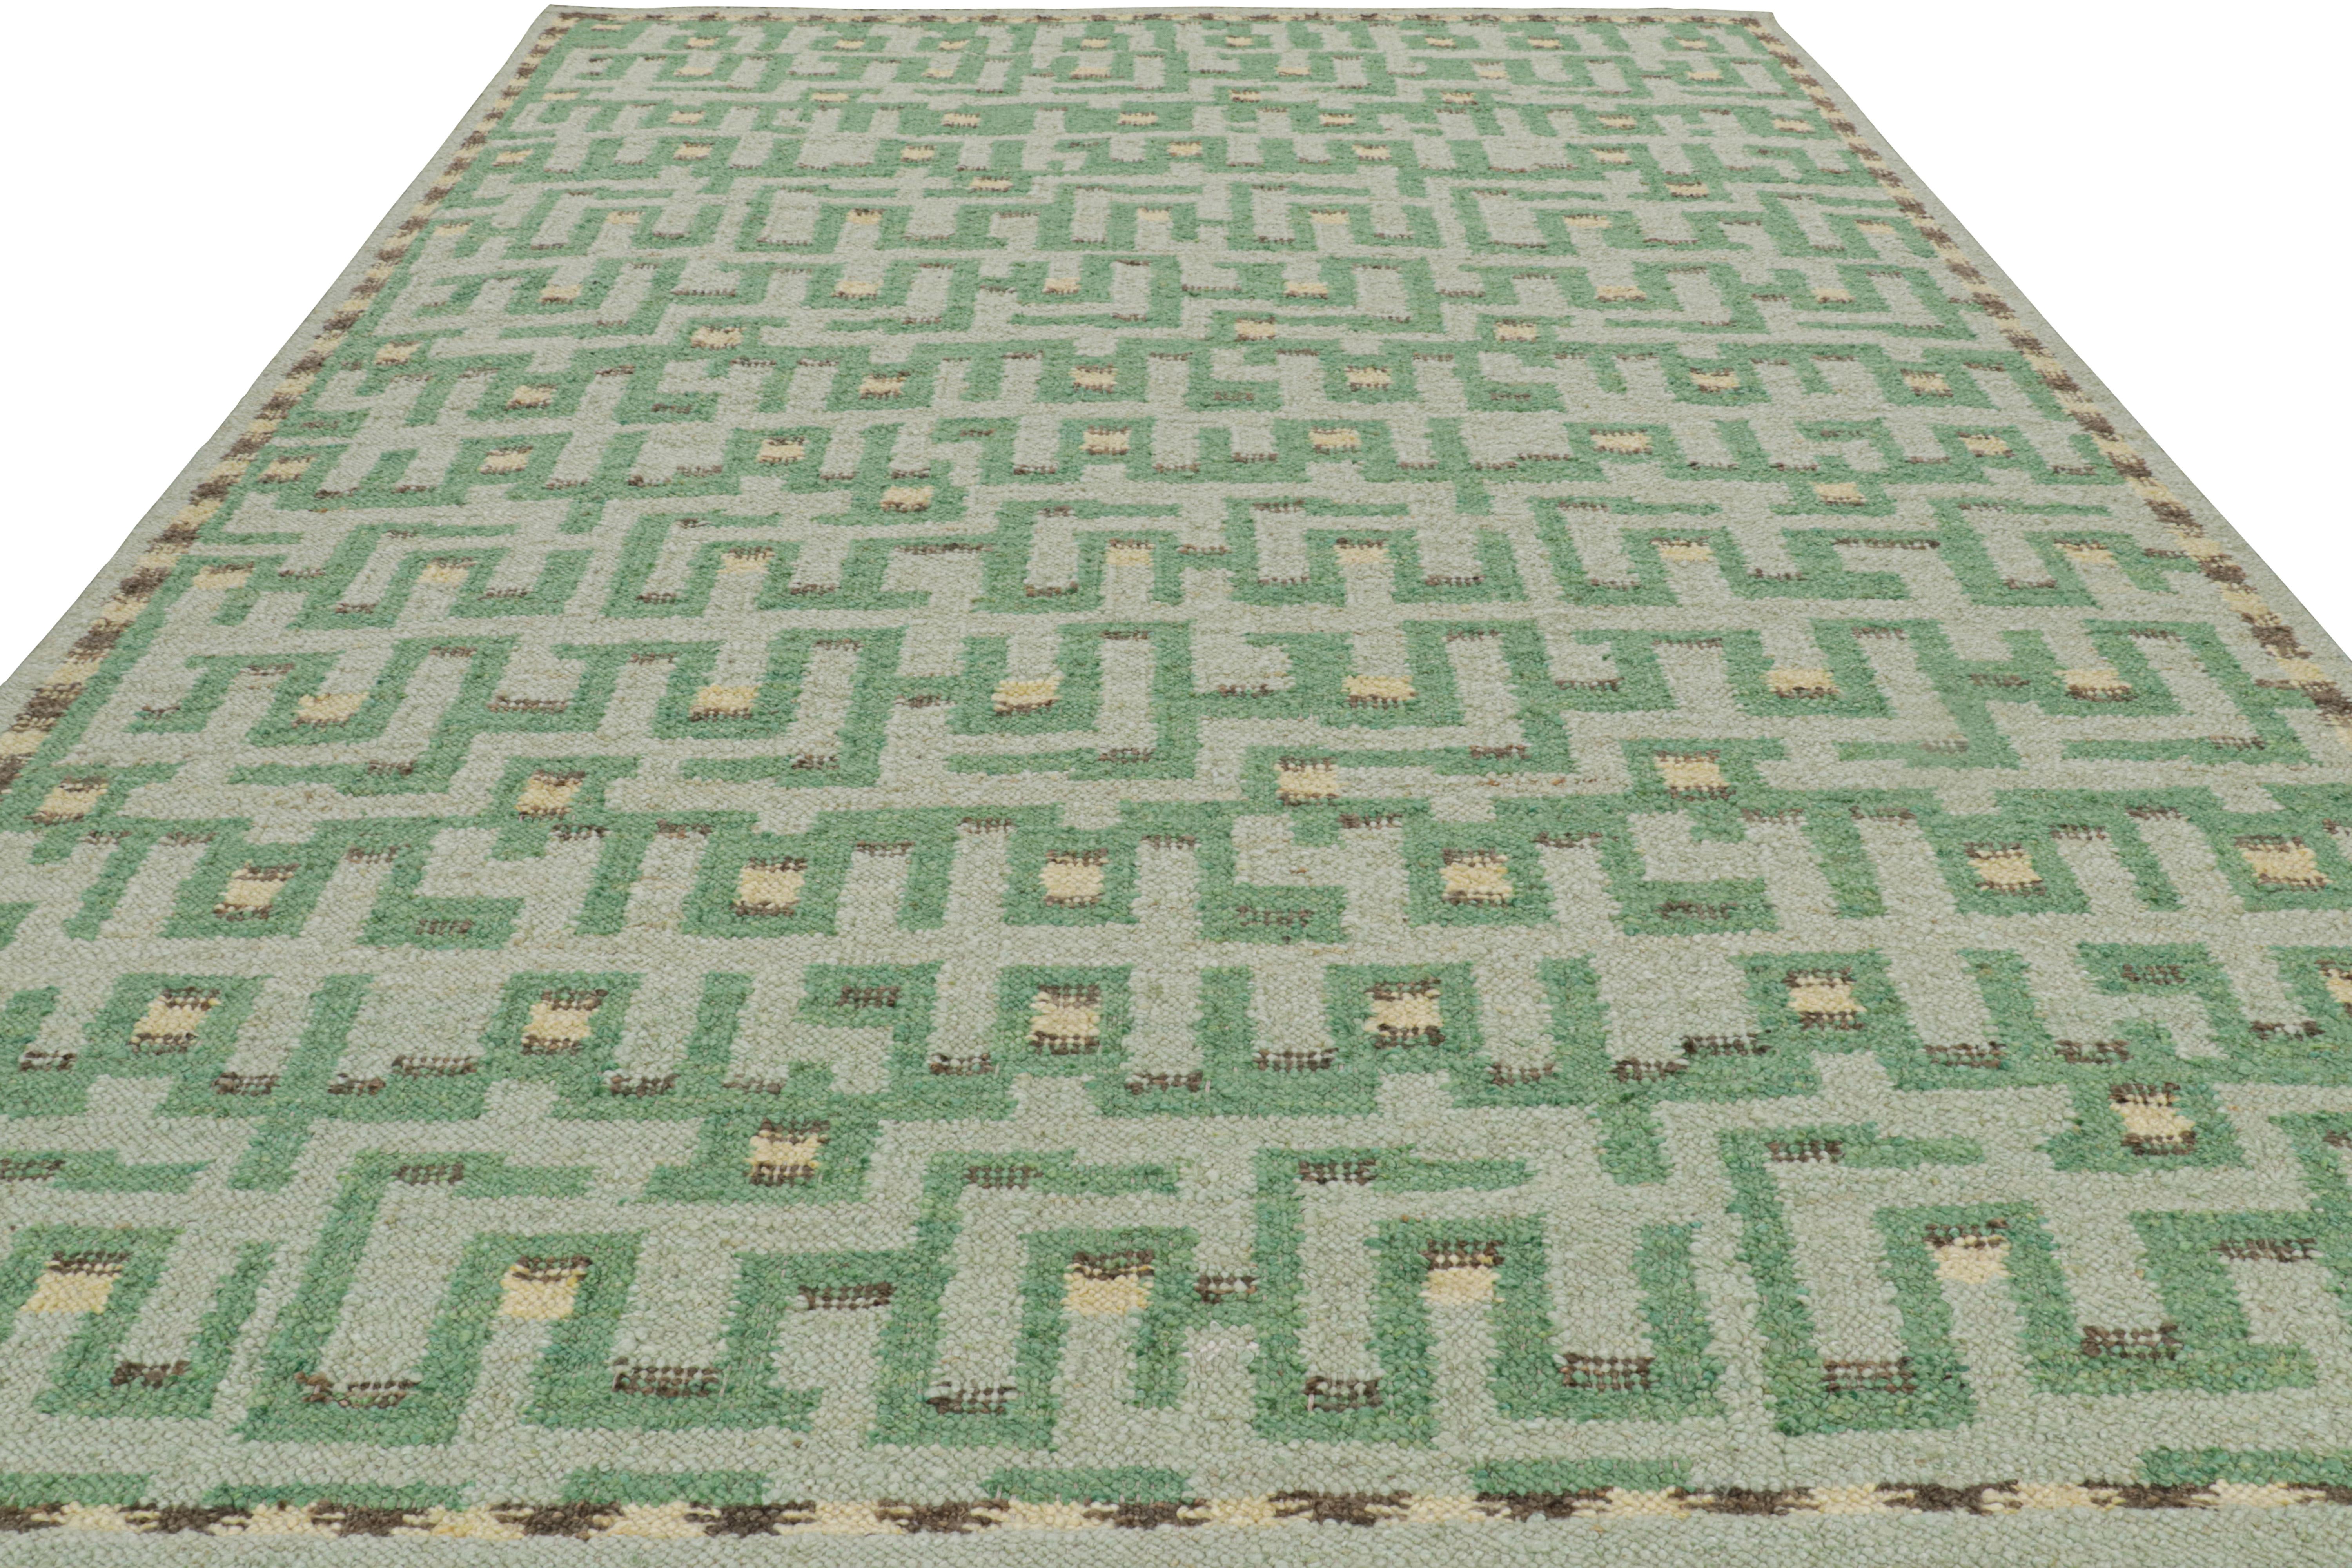 Hand-Woven Rug & Kilim’s Scandinavian Style Rug in Green Tones with Geometric Patterns For Sale